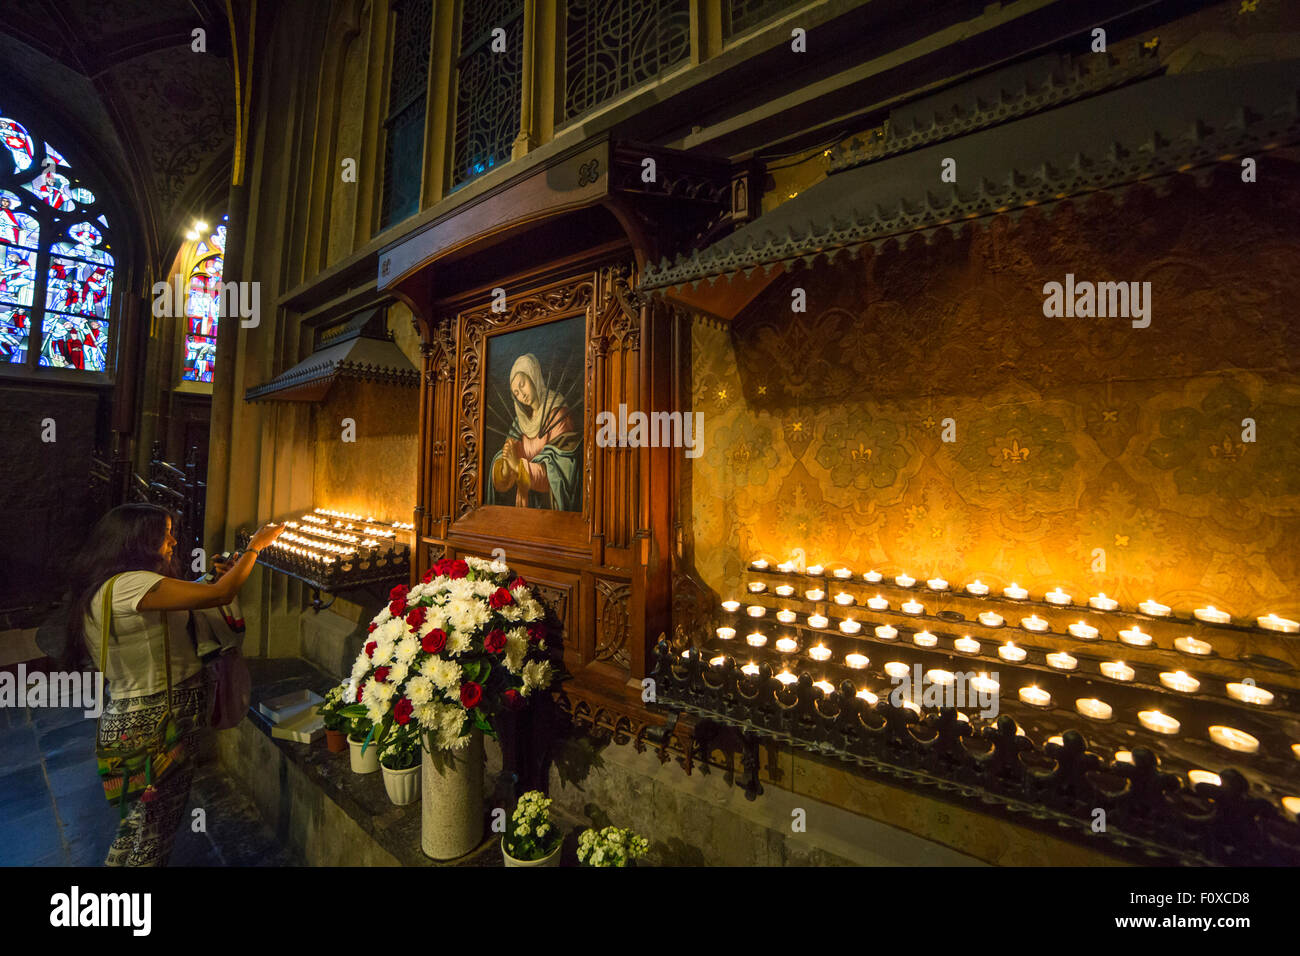 Devotion in the Aachen cathedral, woman lighting a candle with a painting of the virgin Mary, Germany Stock Photo